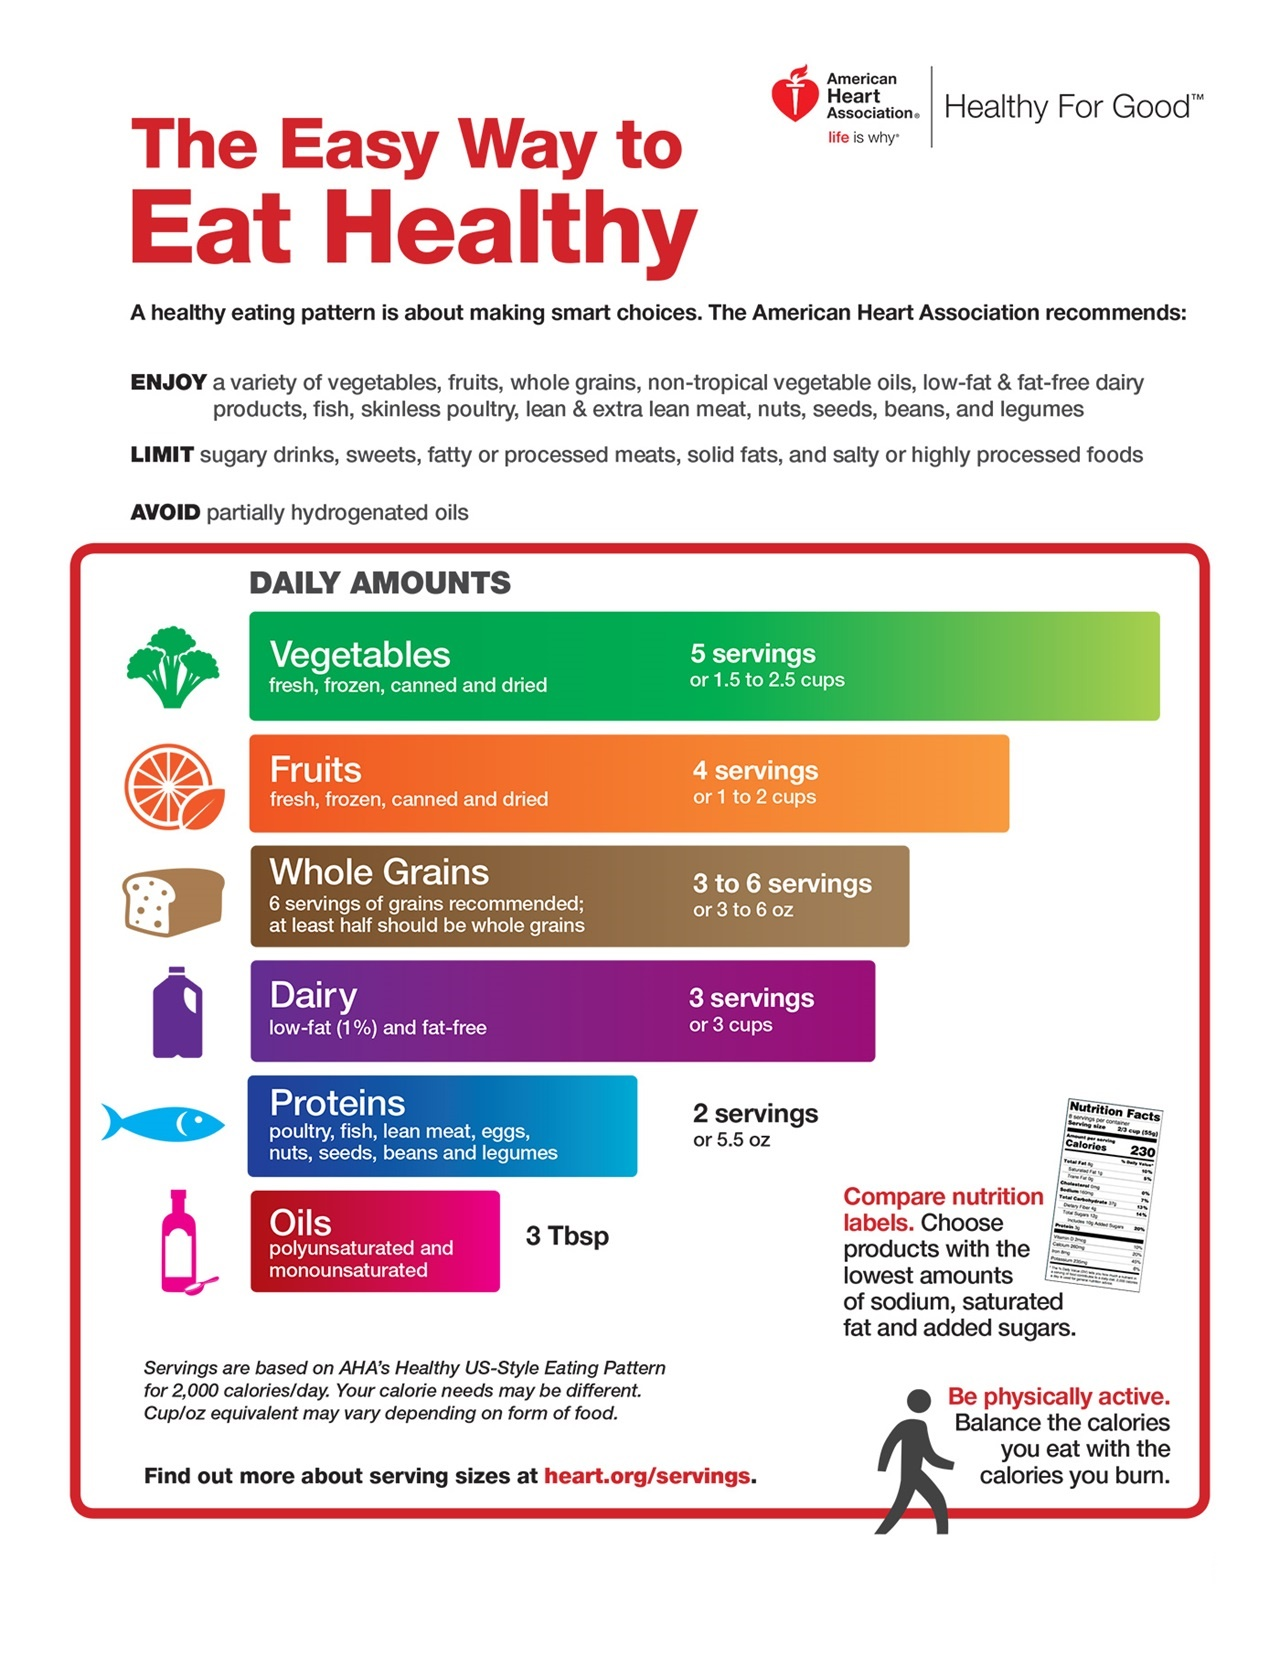 The Easy Way to Eat Healthy tips from American Heart Association